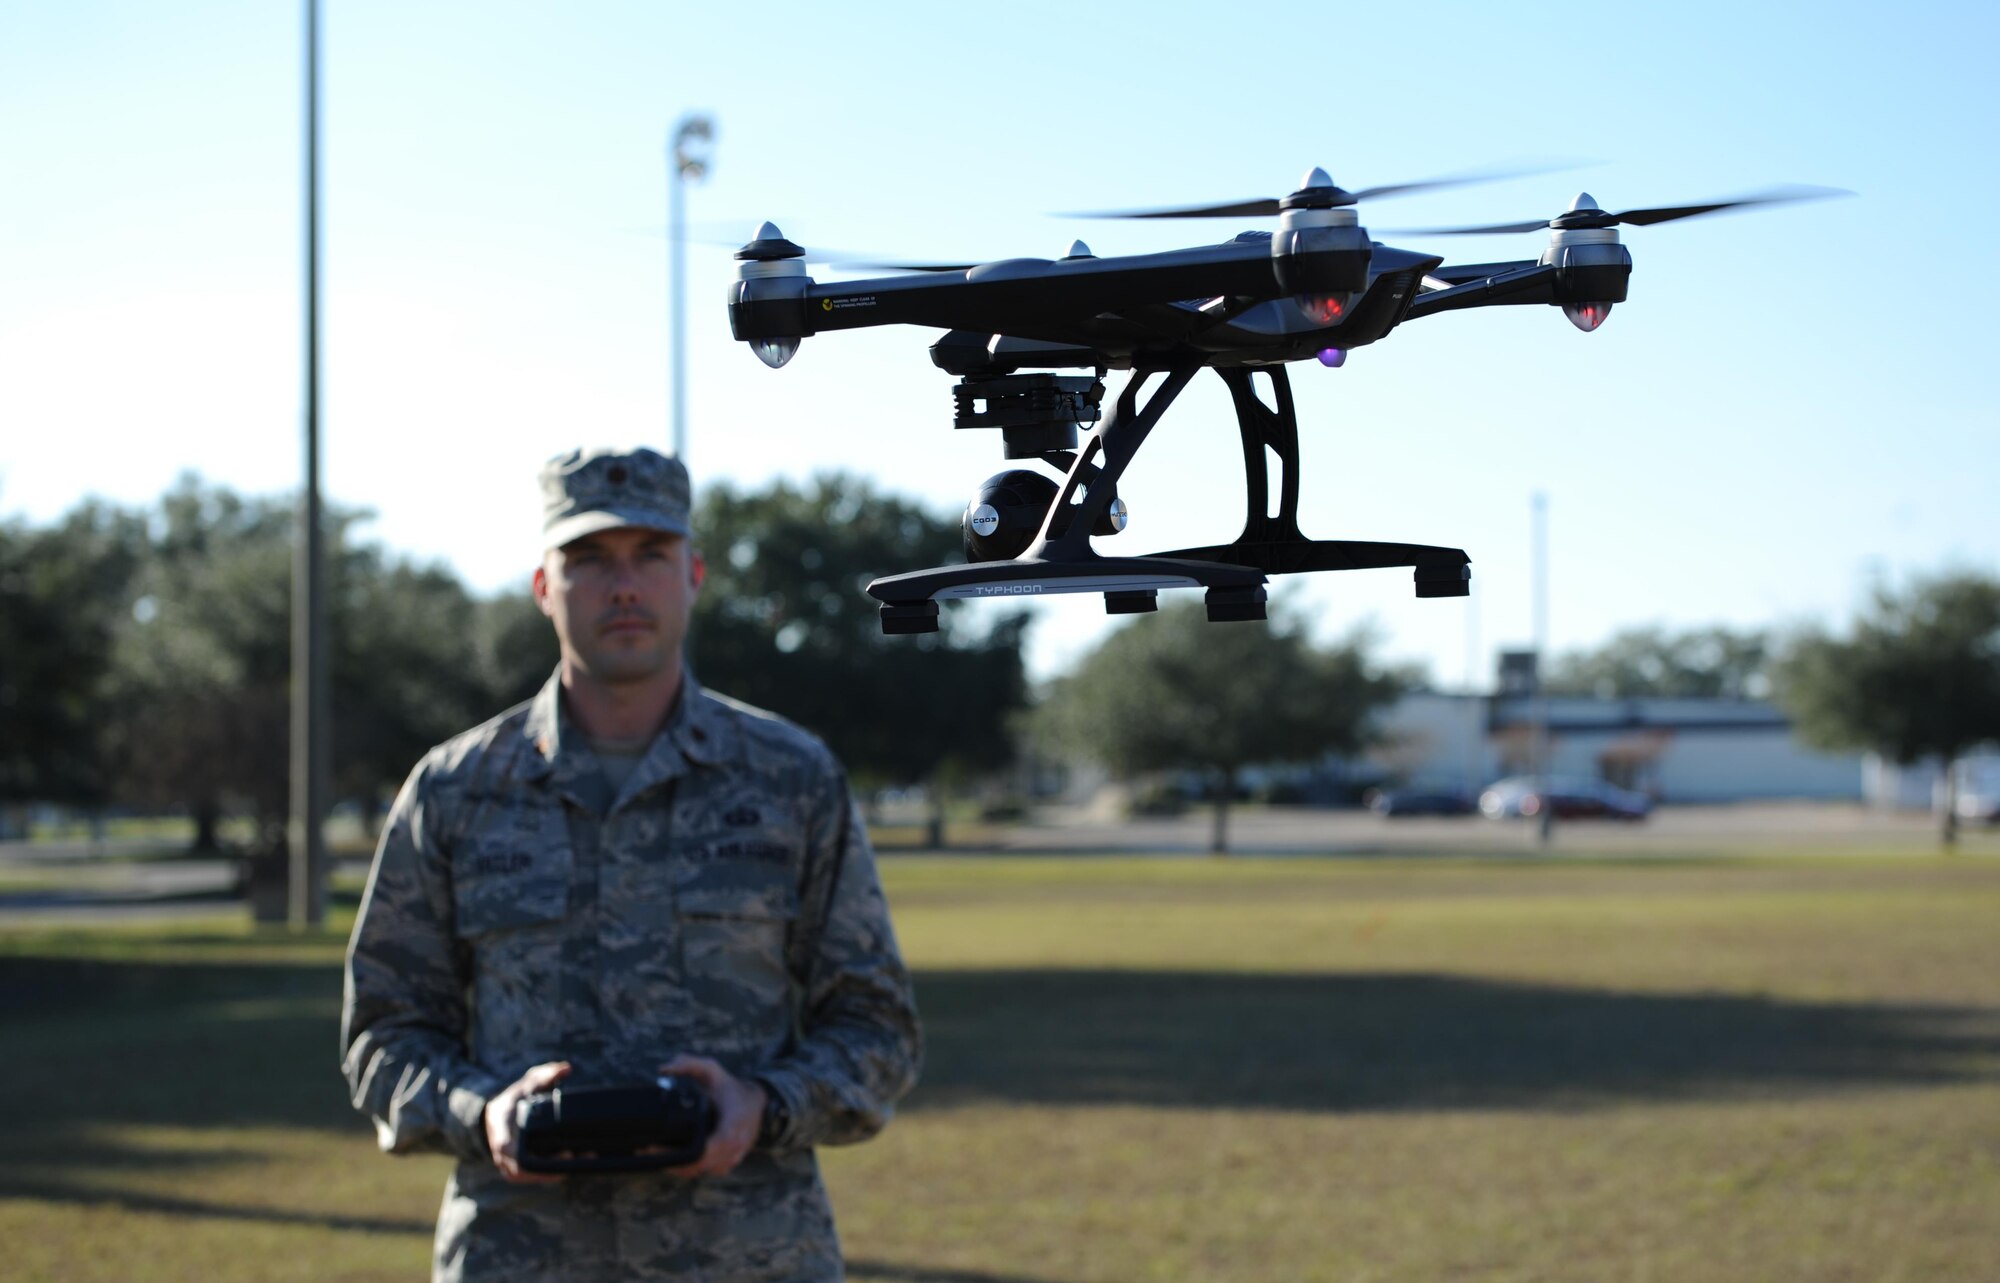 Maj. Joshua D. Pitler, 81st Operations Support Flight commander, operates an Unmanned Aerial System, more commonly known as a drone, Dec. 8, 2015, at Keesler Air Force Base, Miss.  Drones are prohibited from being operated on base. For more information and guidance on the operation of UAS visit, www.FAA.gov/UAS/model_aircraft/ (U.S. Air Force photo by Kemberly Groue)